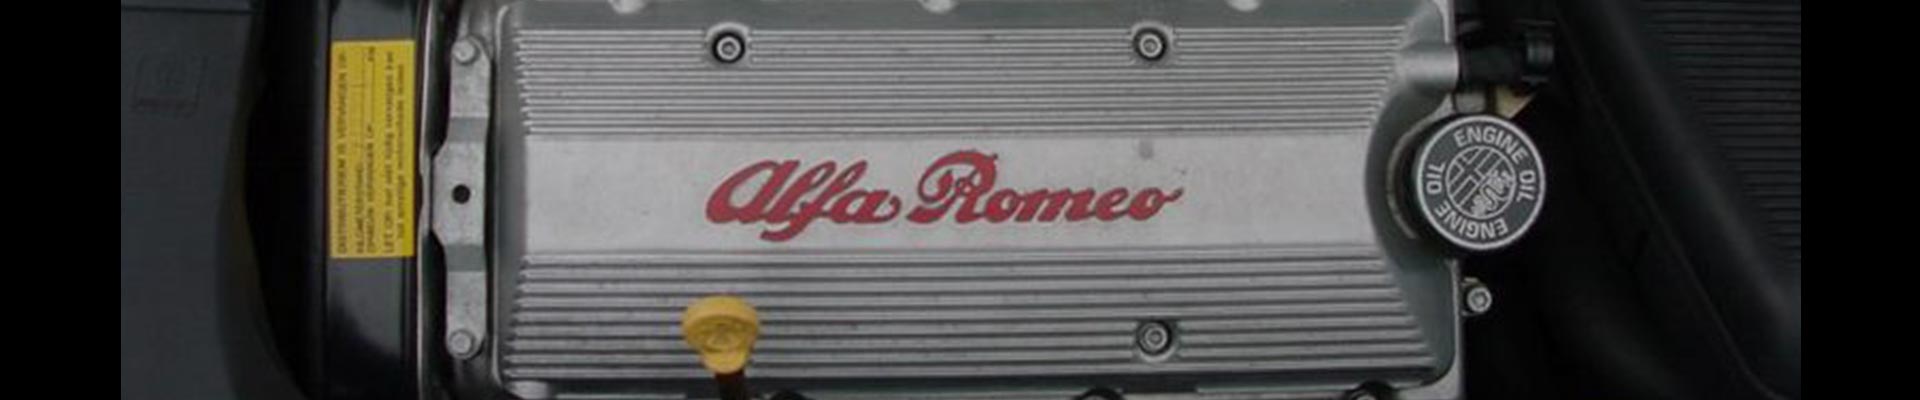 Shop Replacement 1990 Alfa Romeo Spider Parts with Discounted Price on the Net